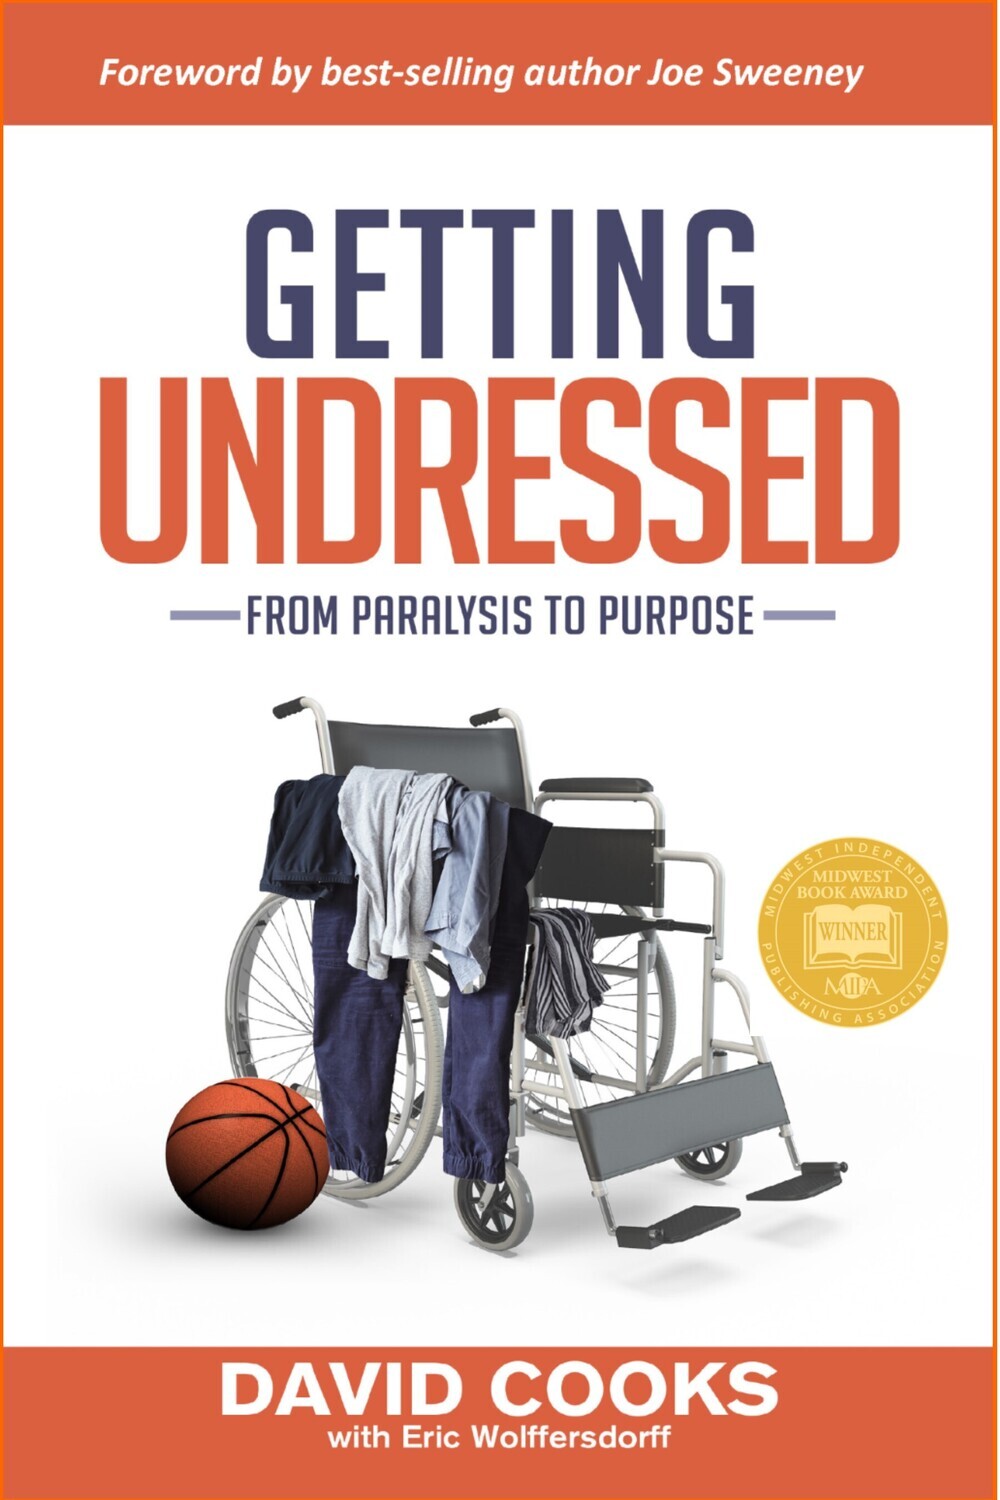 Getting Undressed - From Paralysis to Purpose